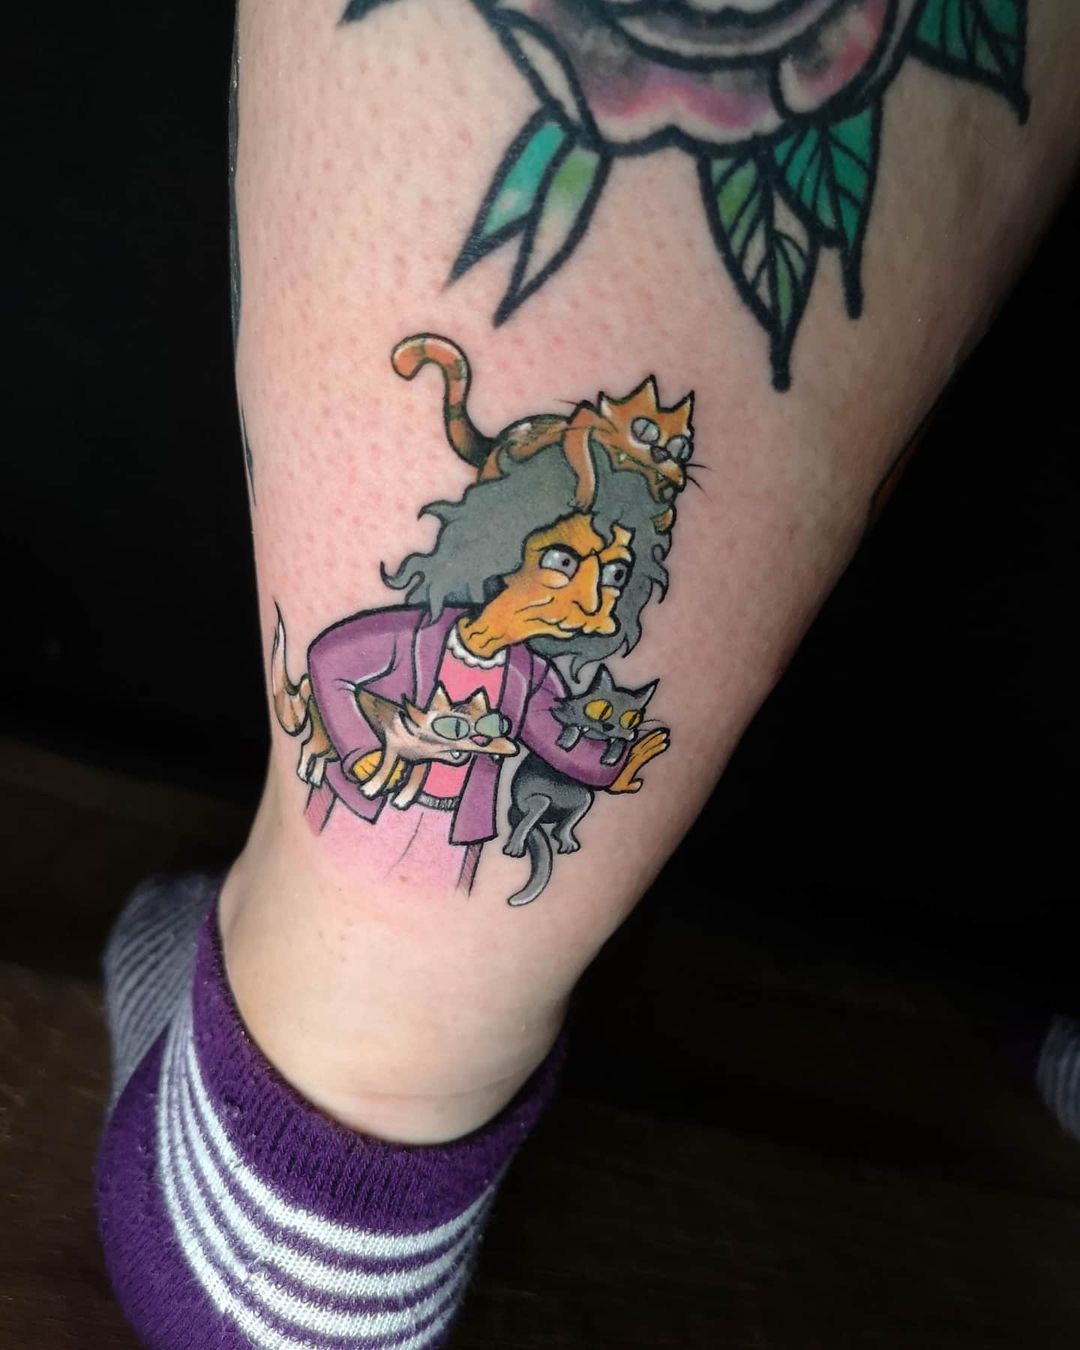 Crazy Cat Lady - tattoo based on The Simpsons